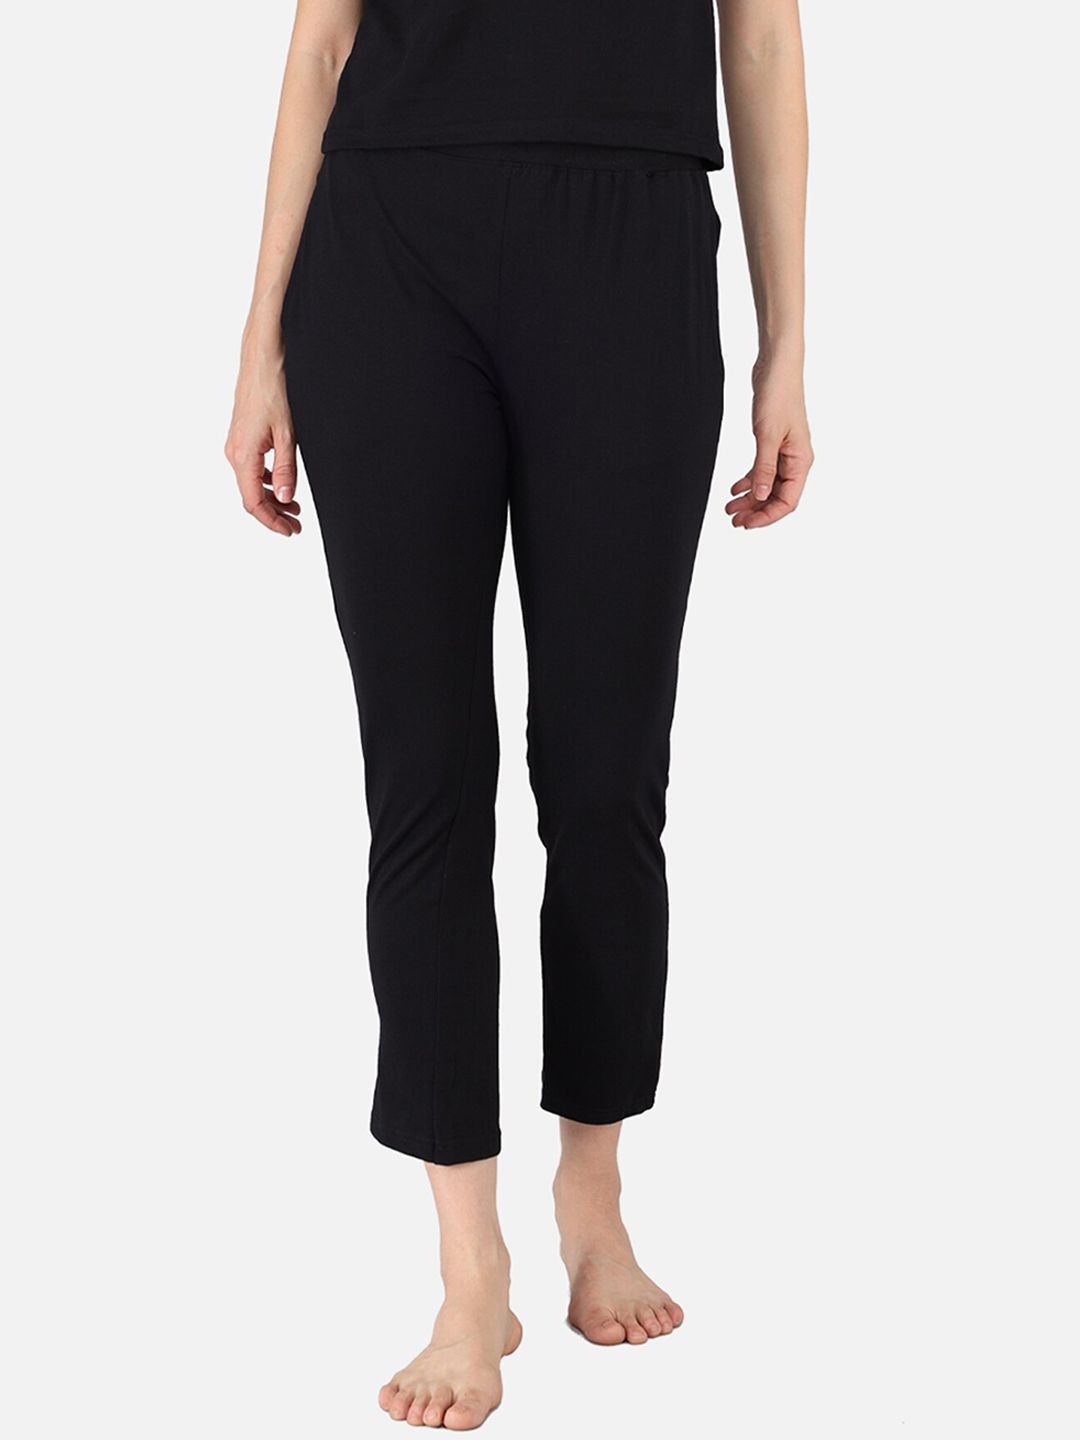 The Dry State Women Black Solid Cotton Pyjamas Price in India